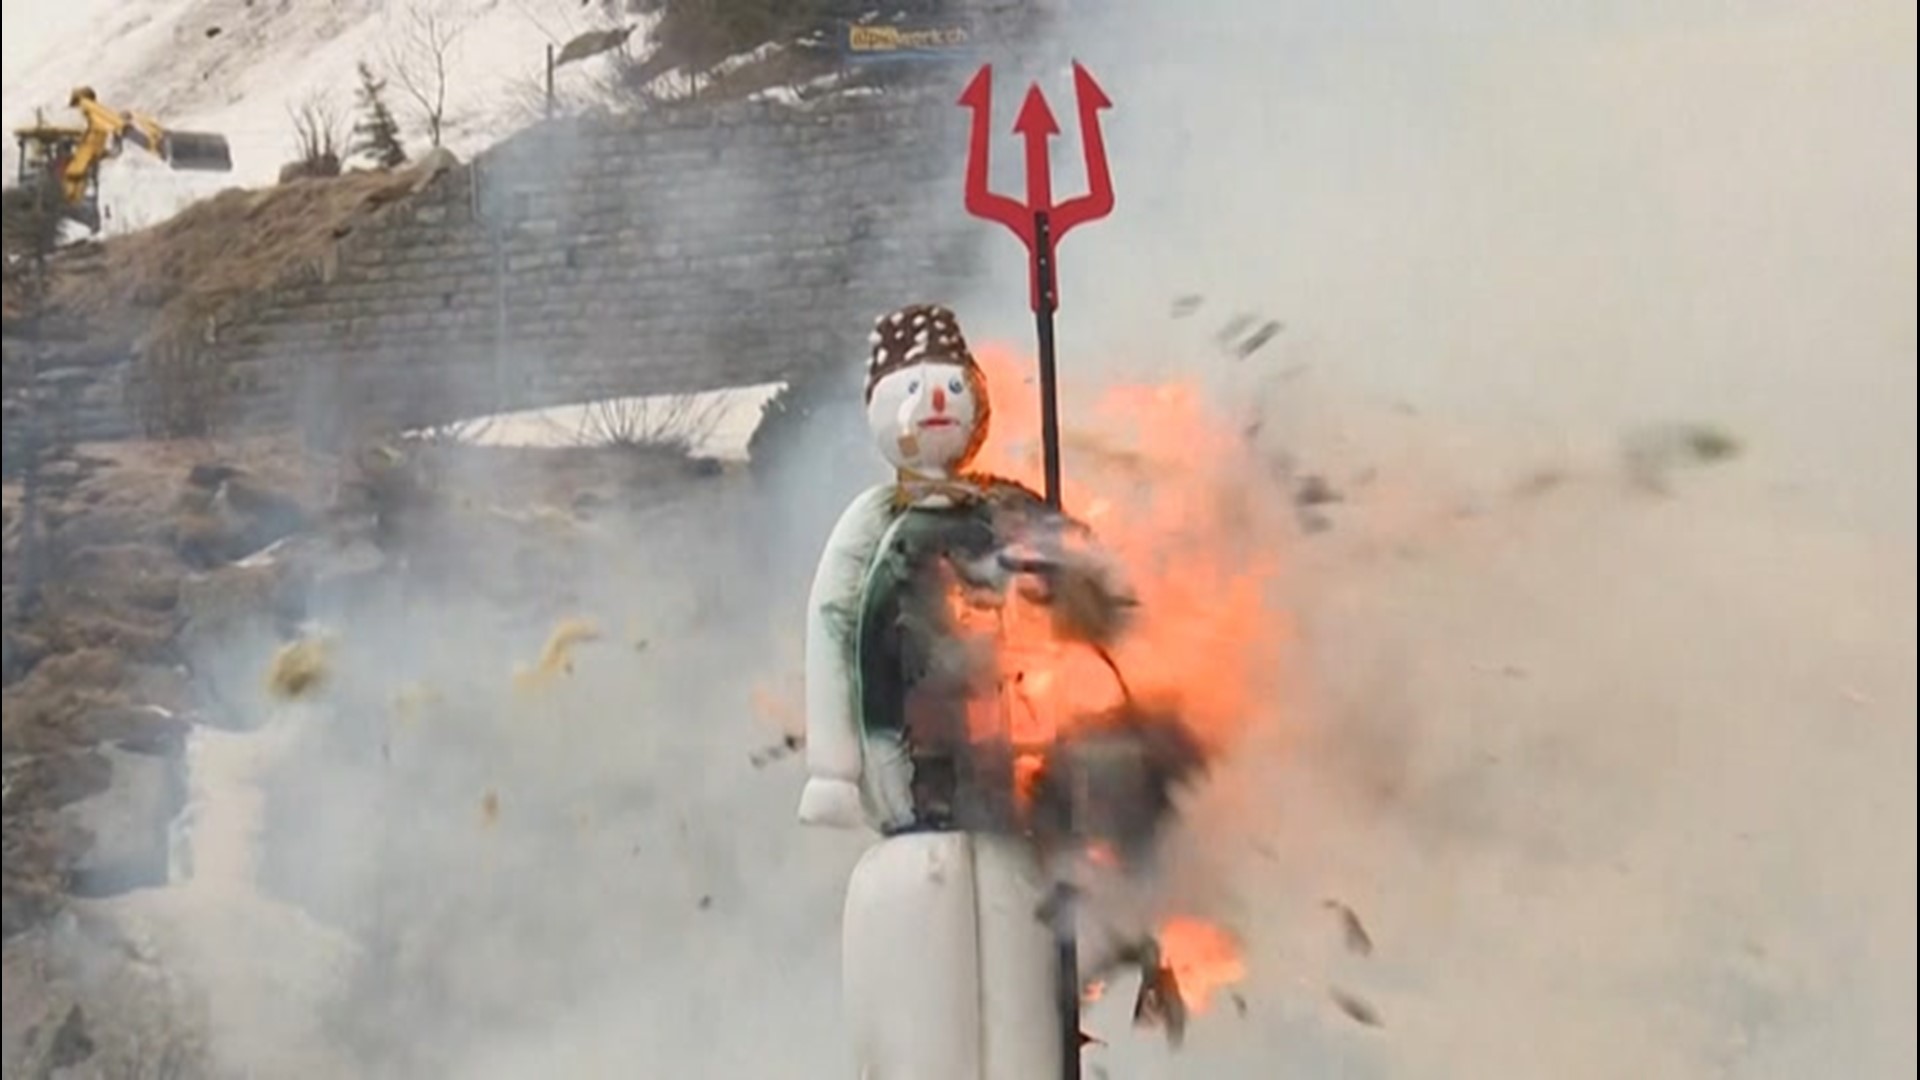 A Zurich tradition, the burning of the Böög, involves a giant snowman made of burlap and wood, a whole lot of firecrackers, and hours of festivities.